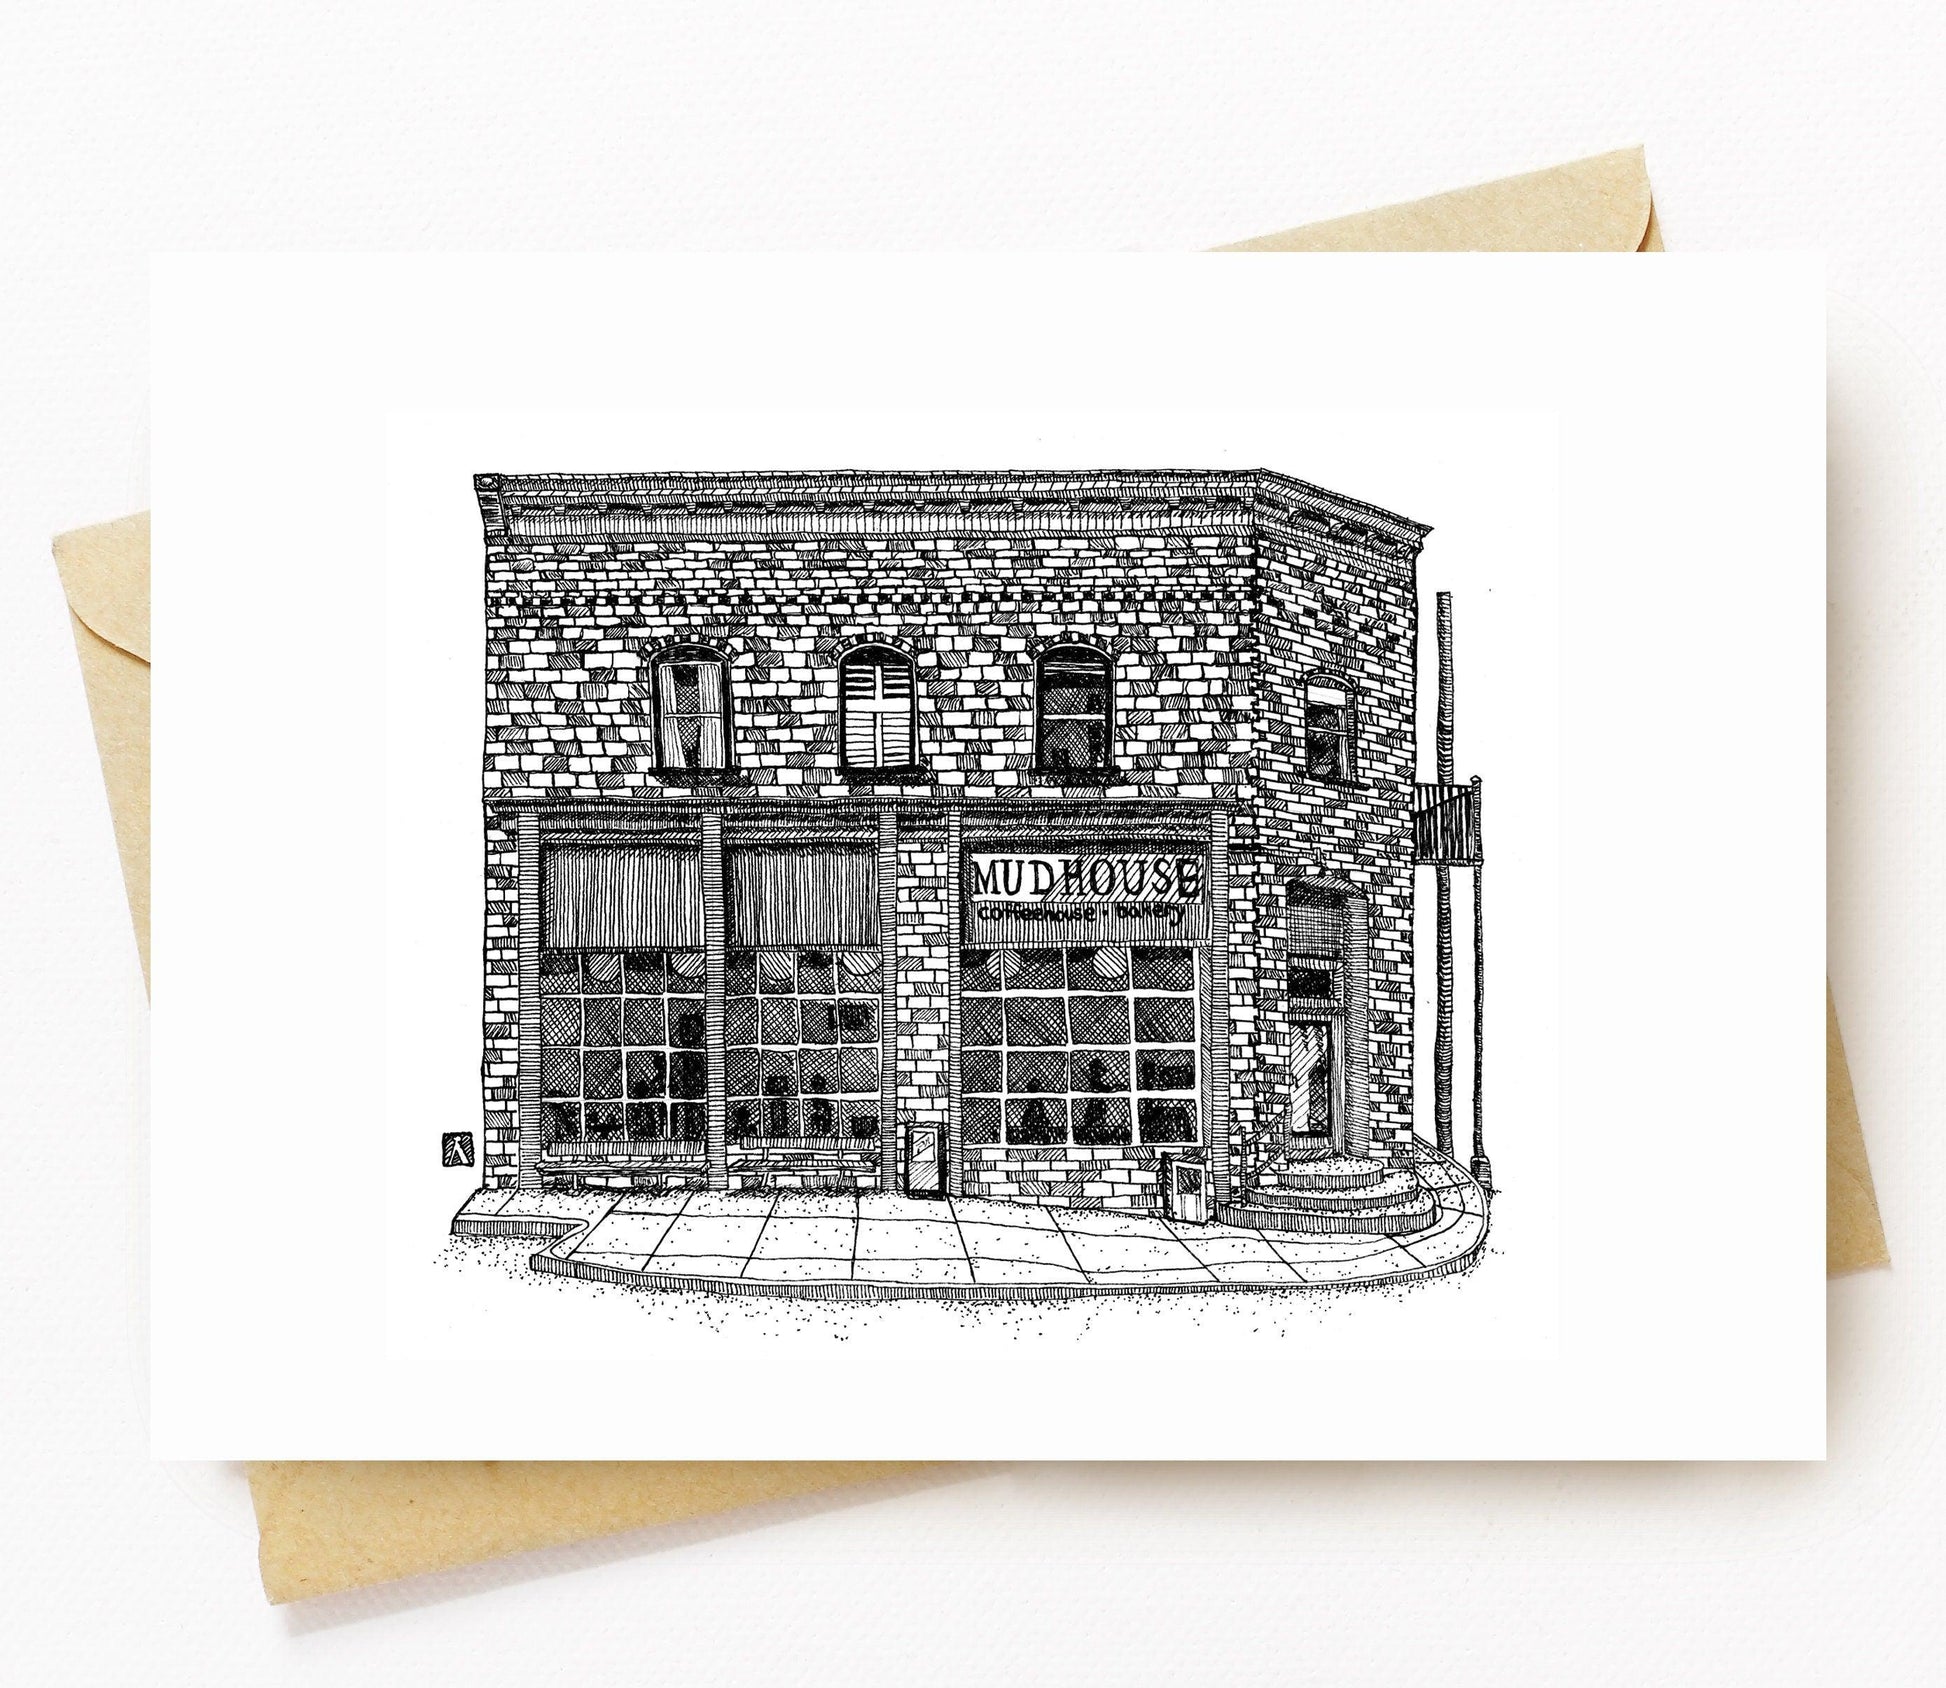 BellavanceInk: Greeting Card With A Pen & Ink Drawing Of The Mudhouse Cafe In Crozet Virginia 5 x 7 Inches - BellavanceInk